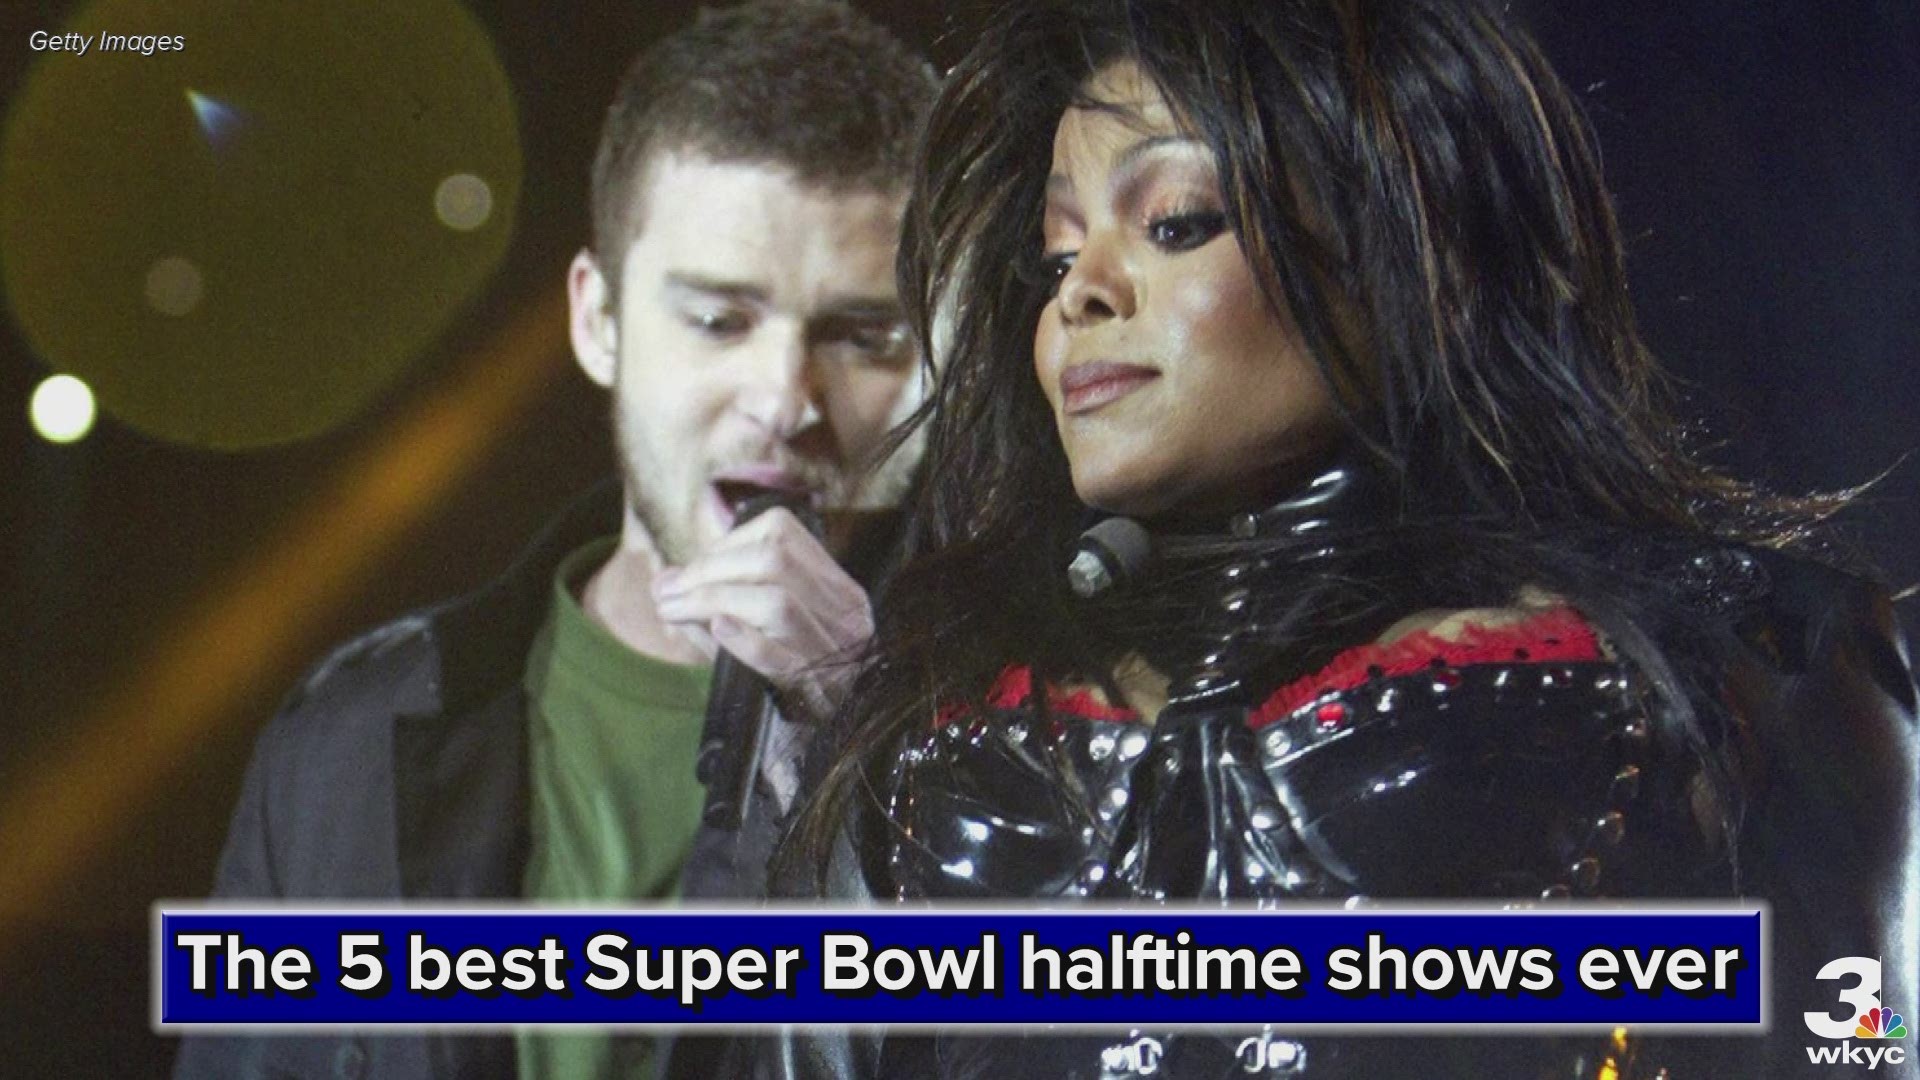 5 Super Bowl halftime shows that were better than the game